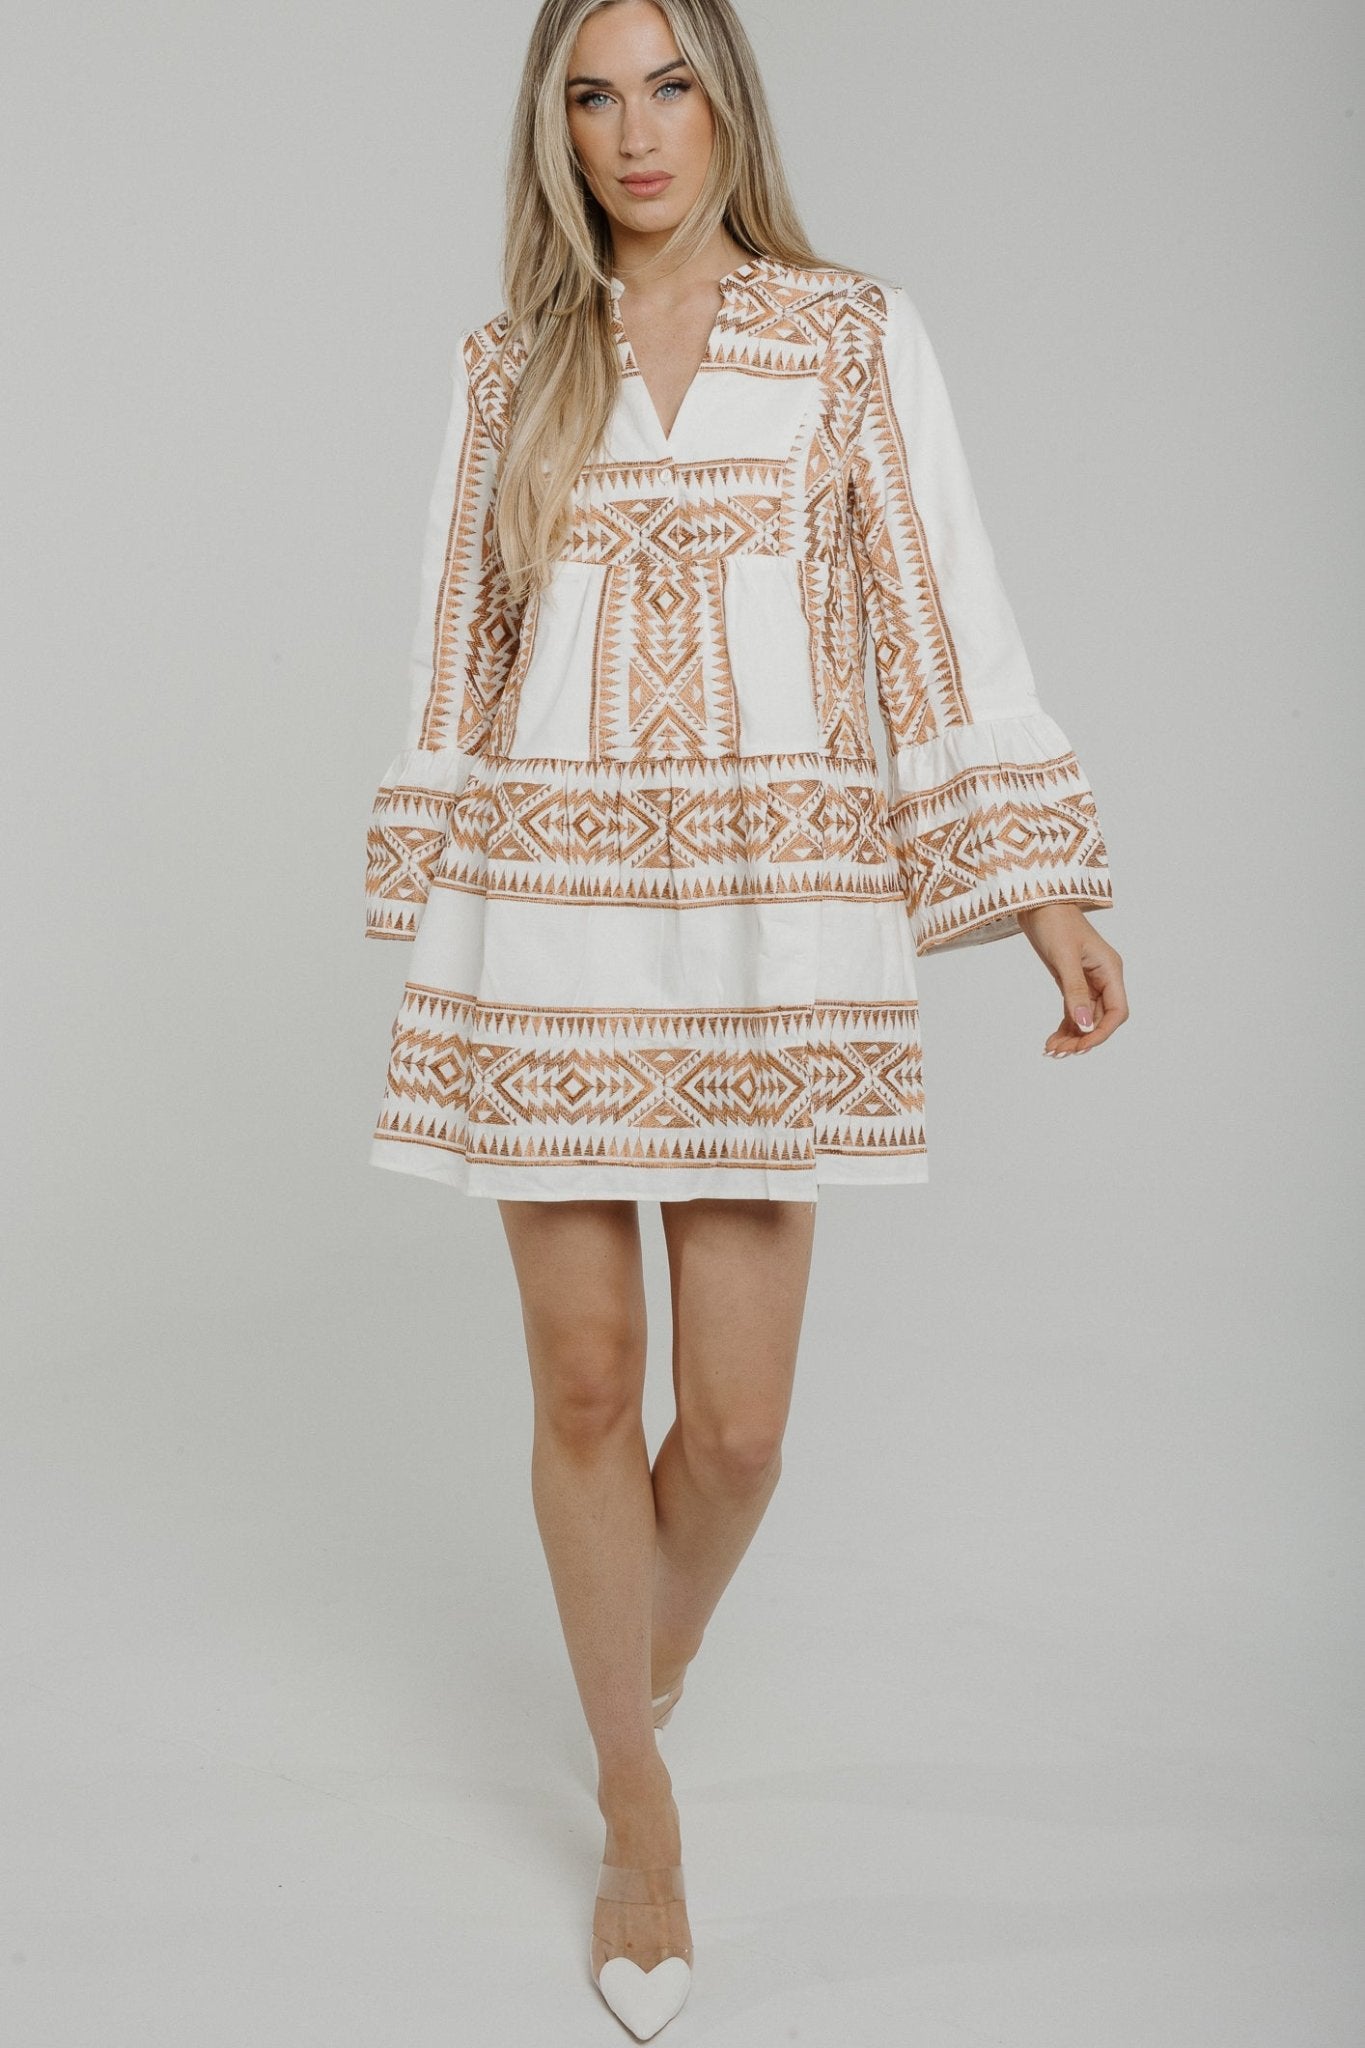 Poppy Bell Sleeve Embroidered Dress In White - The Walk in Wardrobe